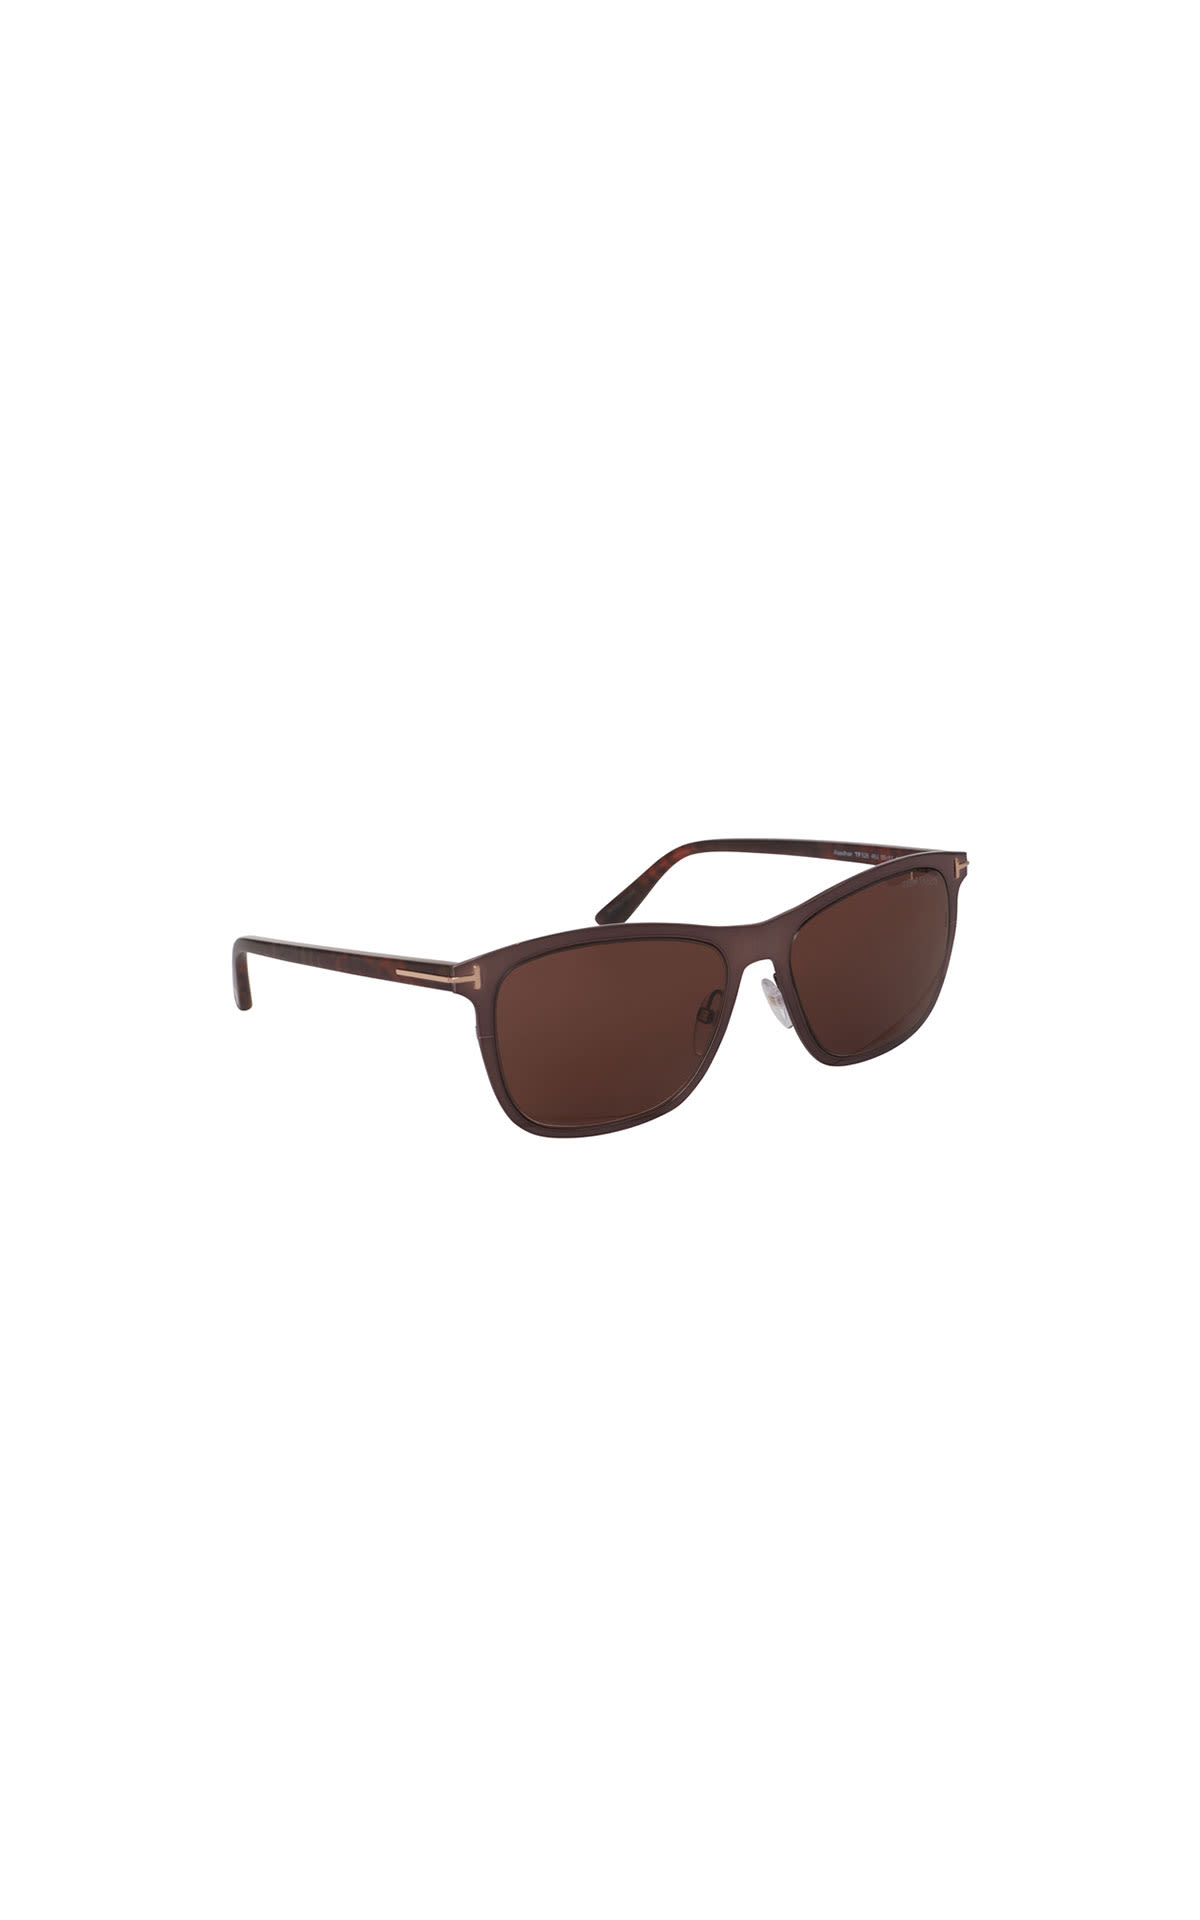 David Clulow Tom Ford sunglasses from Bicester Village